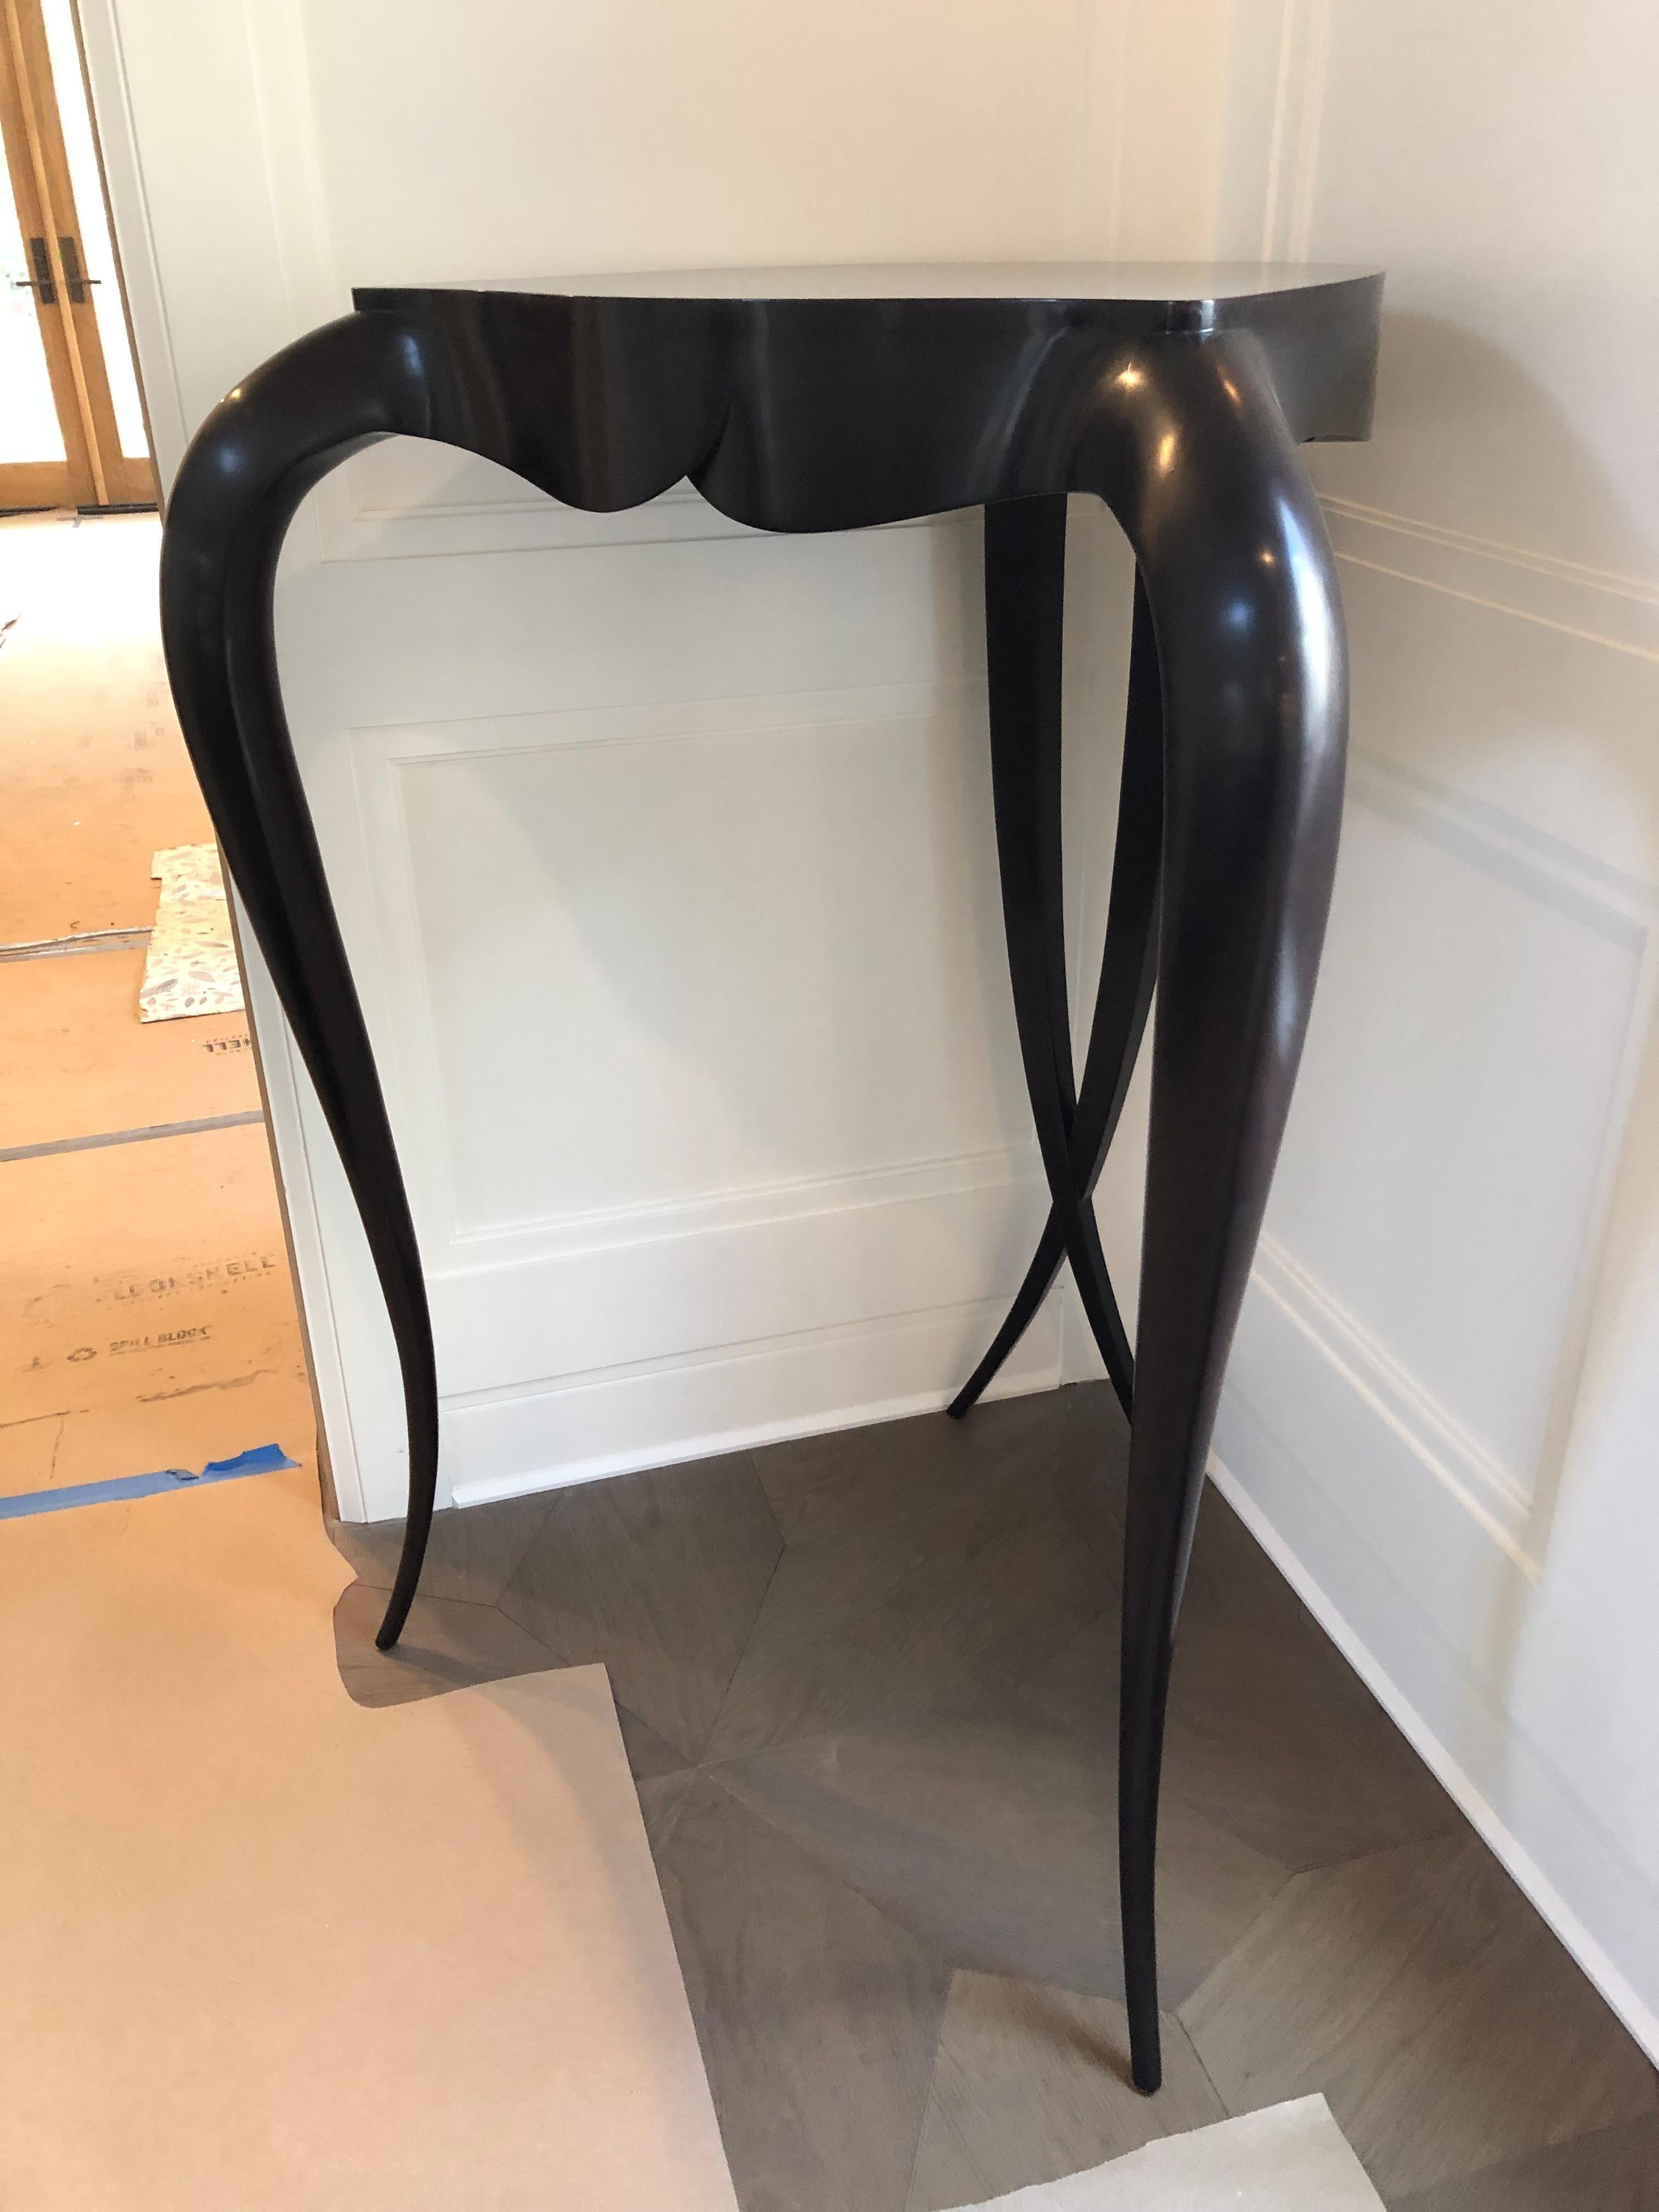 Sophisticated sensual glossy dark mahogany very tall curvaceous console pedestal, an eye catching perch for an objet d'arte or flower arrangement on sinuous cabriole legs having the signature Christopher Guy criss cross tapered elegant legs in the